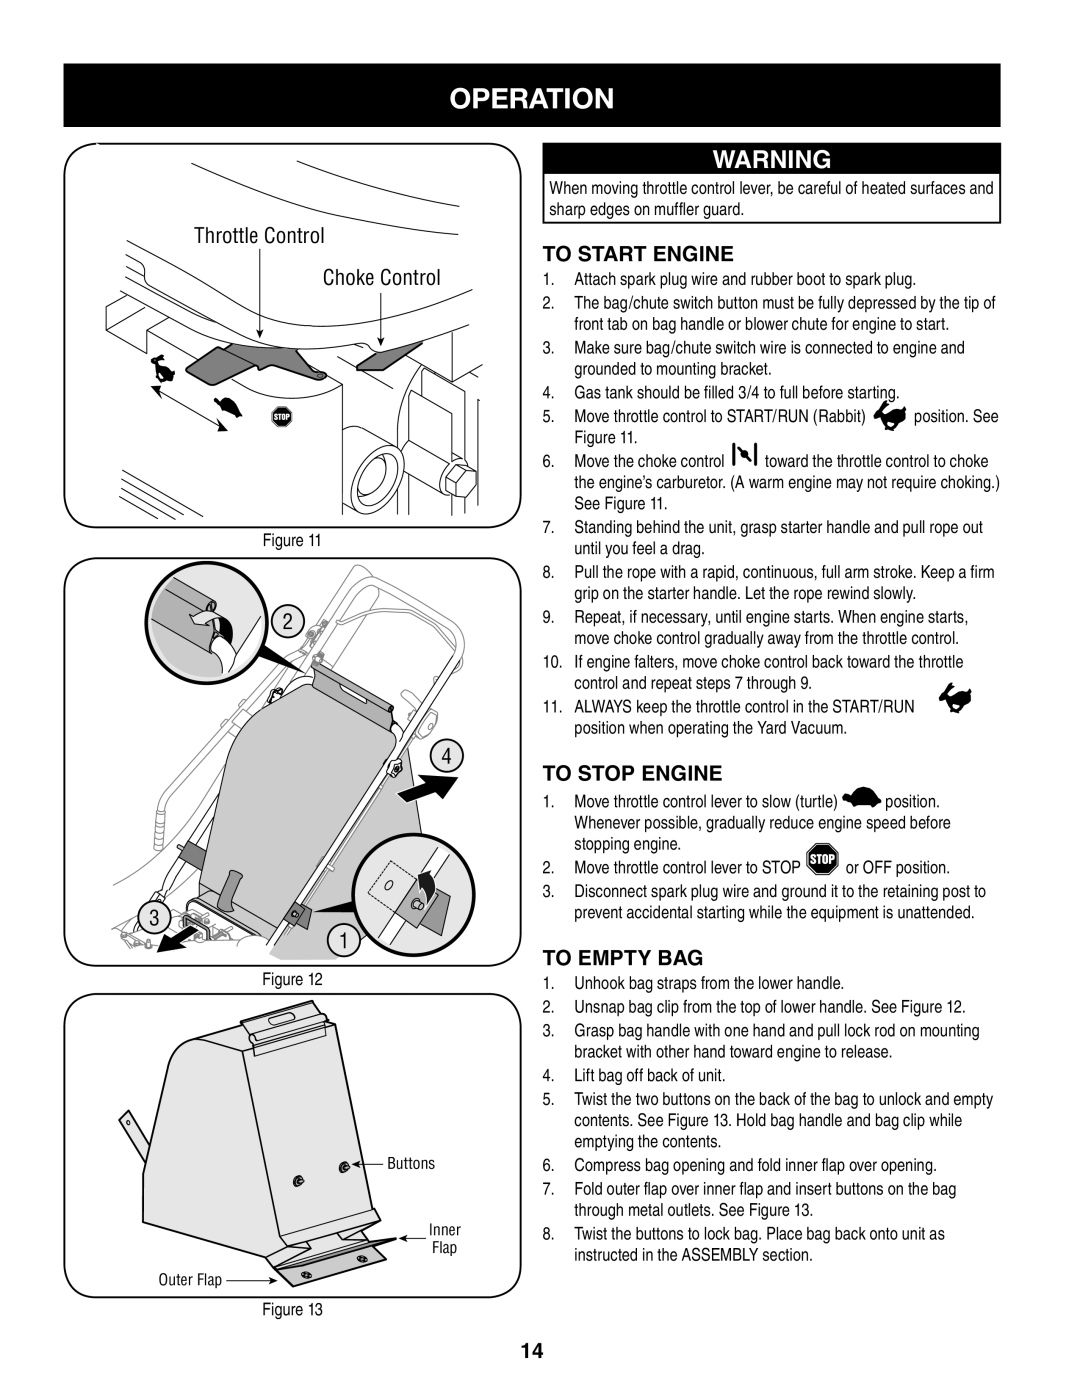 Craftsman 247.77013.0 manual Operation, To Start Engine, To Stop Engine, To Empty Bag 